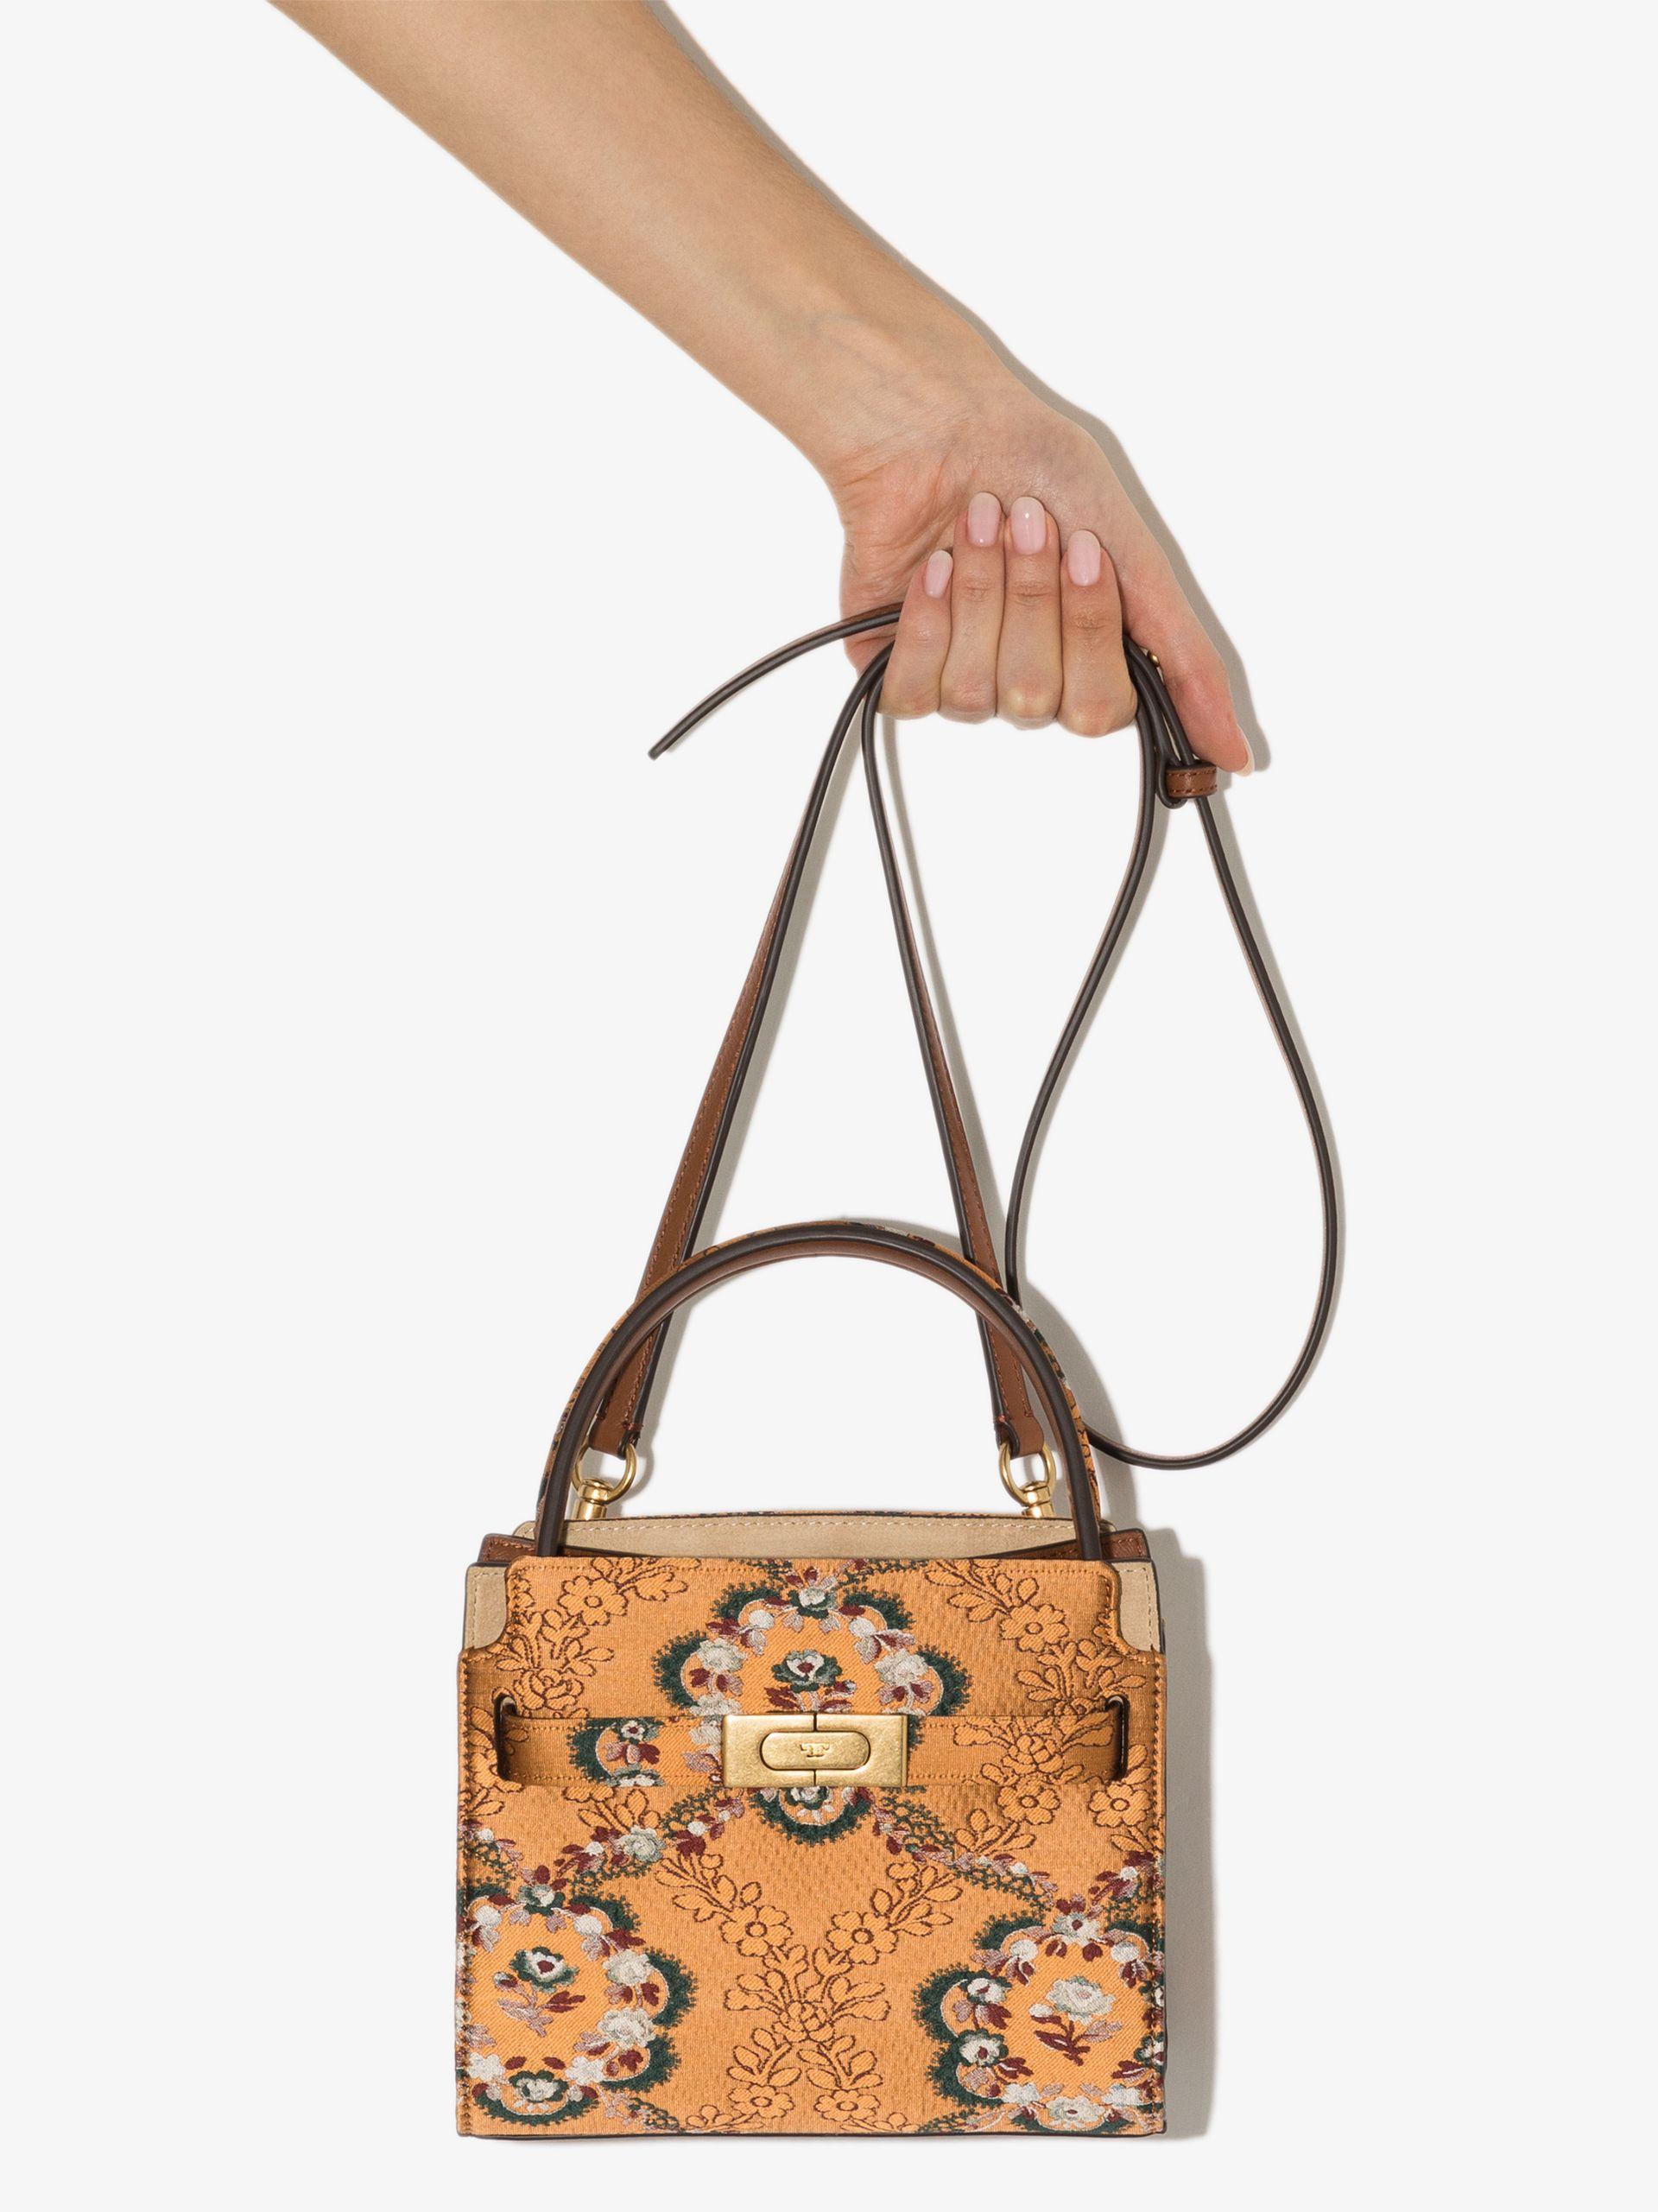 Lee Radziwill Leather Tote Bag in Brown - Tory Burch